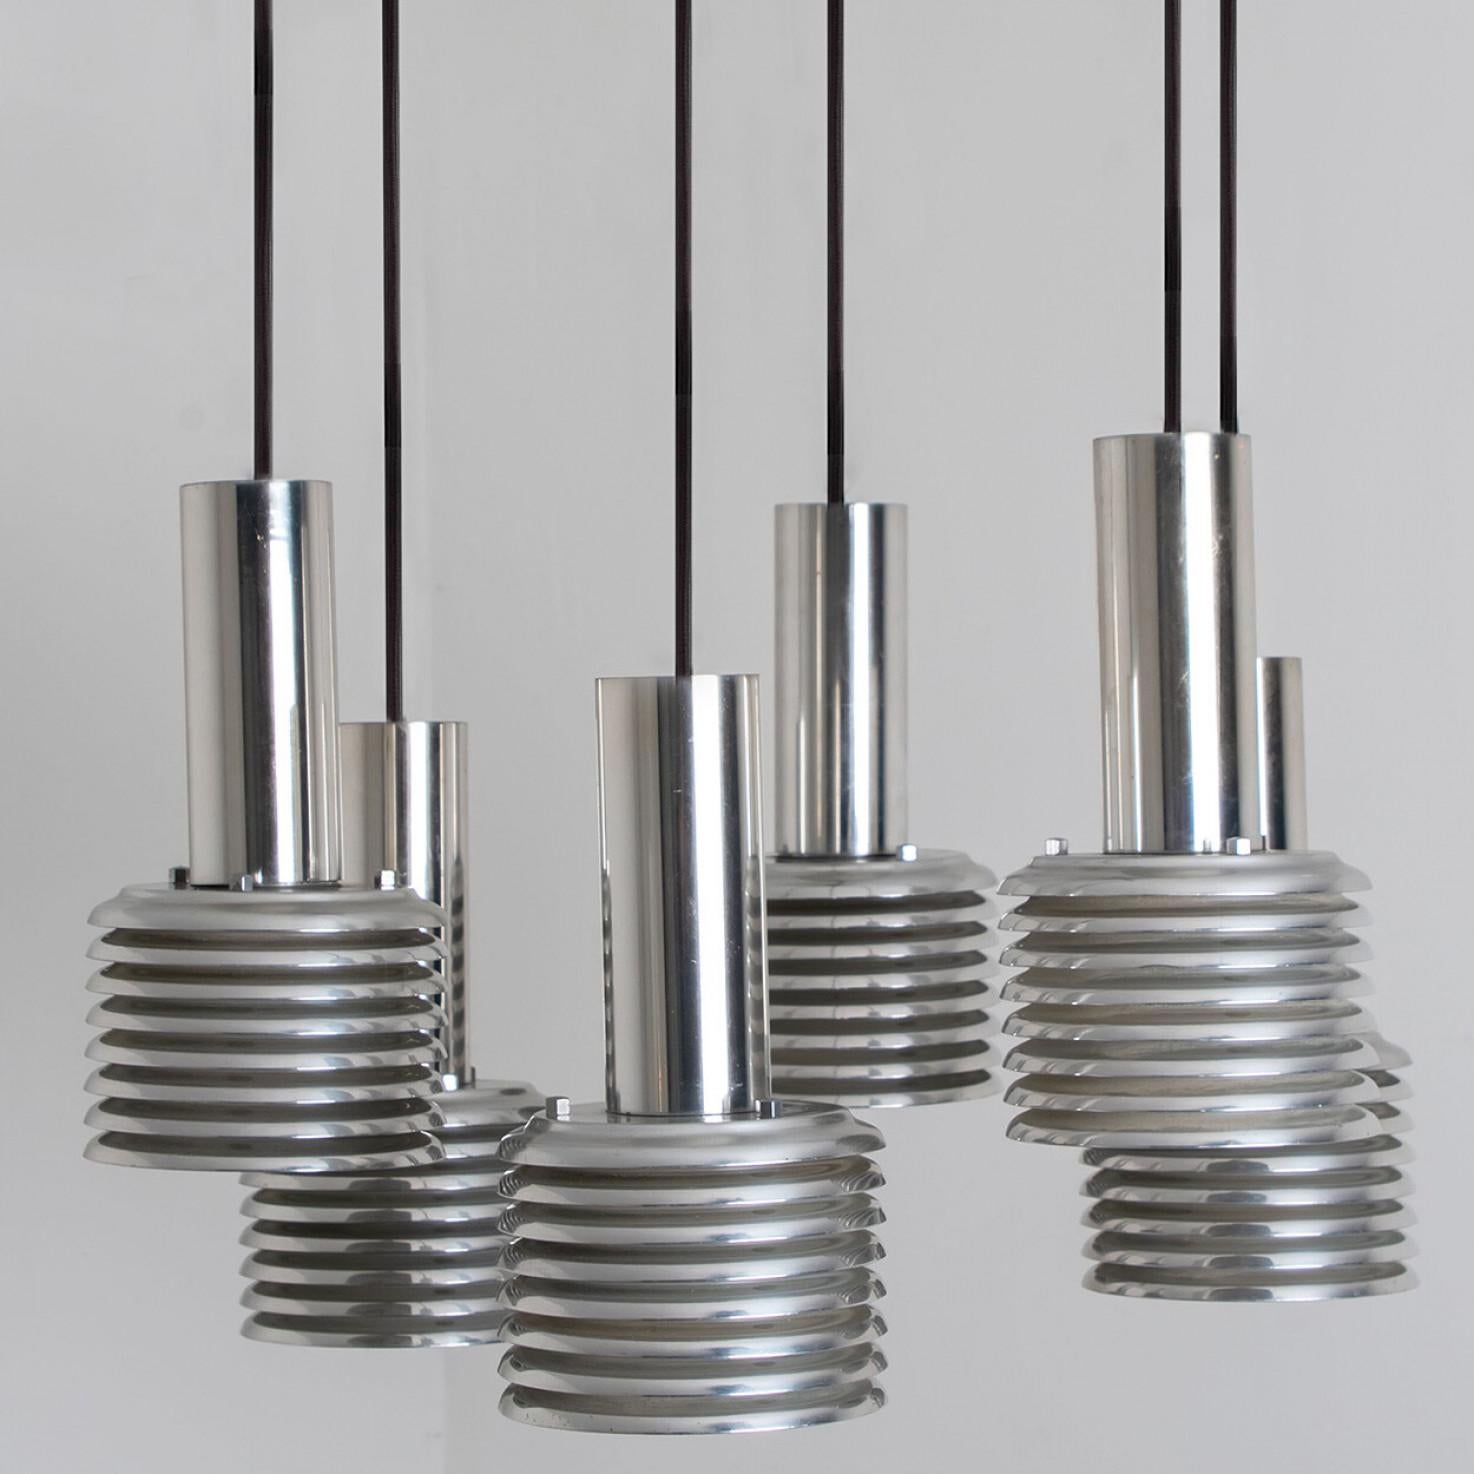 One of the six original 1970s cascades of chrome pendant lights produced by Staff Leuchten, Germany.
Heavy quality glass lights with hand-blown shades on a chrome pendant. All original.
This item is in excellent vintage condition with very slight